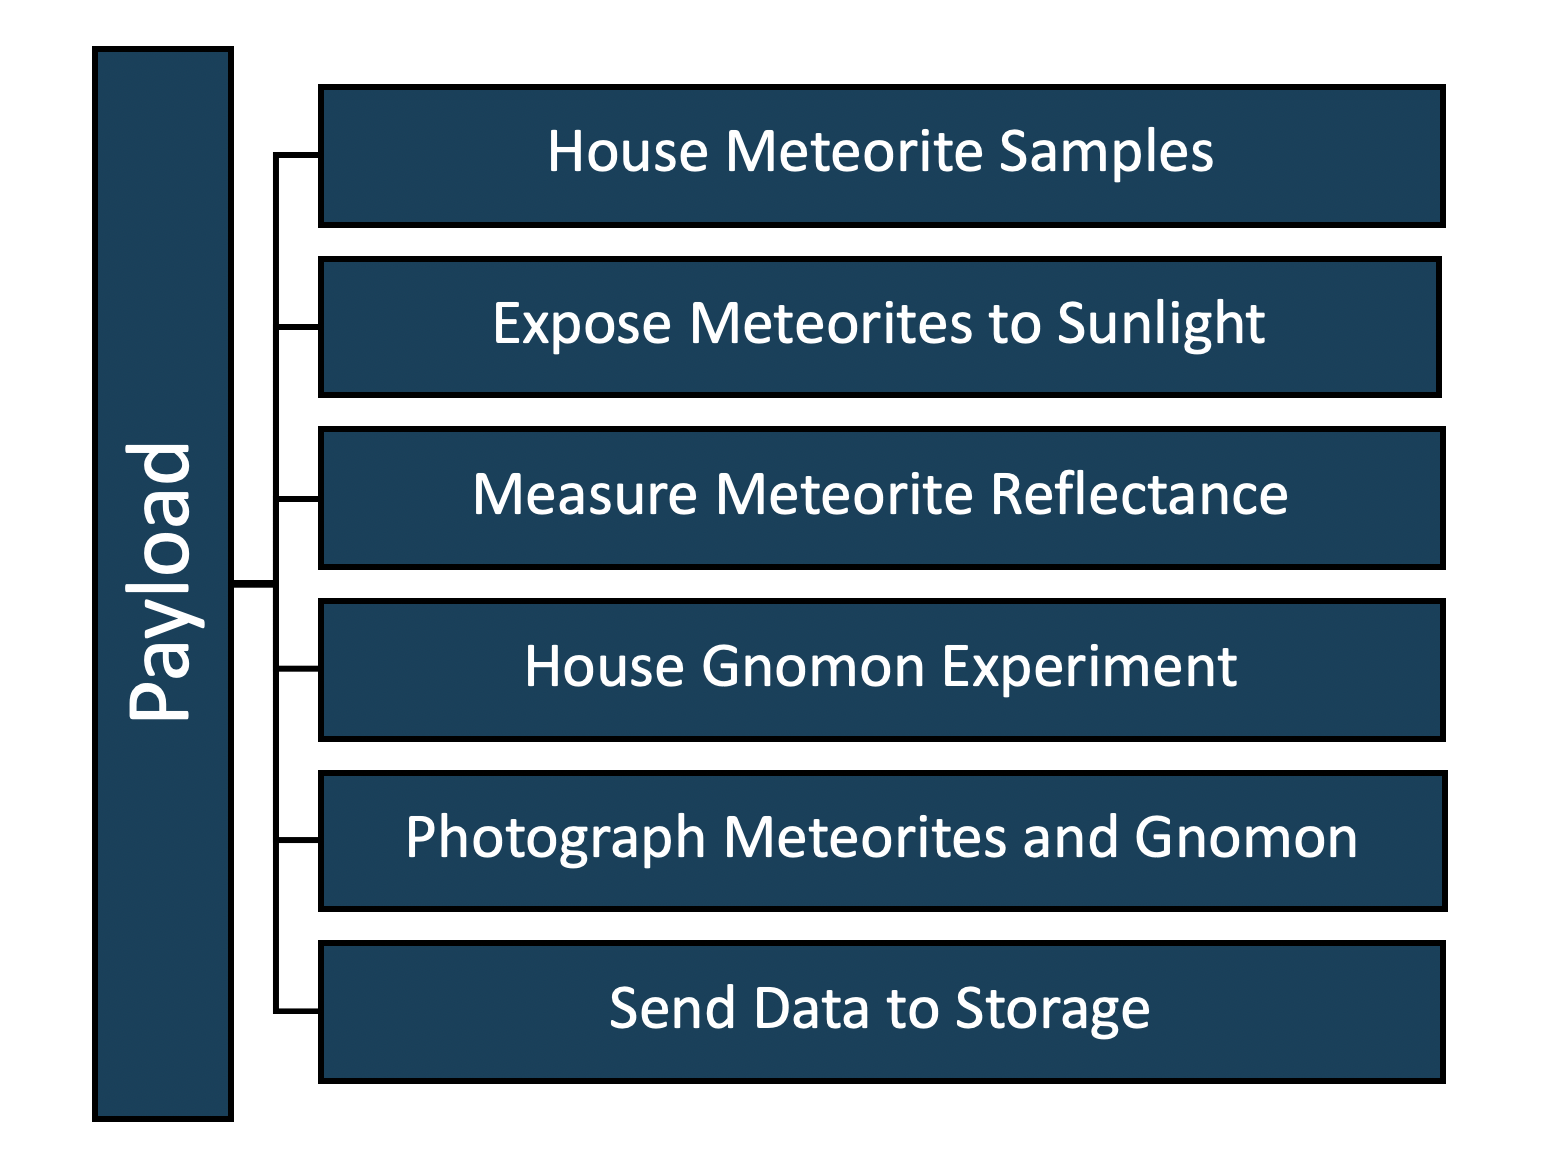 a graph showing the House Meteorite Samples, Expose Meteorites to Sunlight, Measure Meteorite Reflectance, House Gnomon Experiment, Photograph Meteorites and Gnomon, Send Data to Storage.